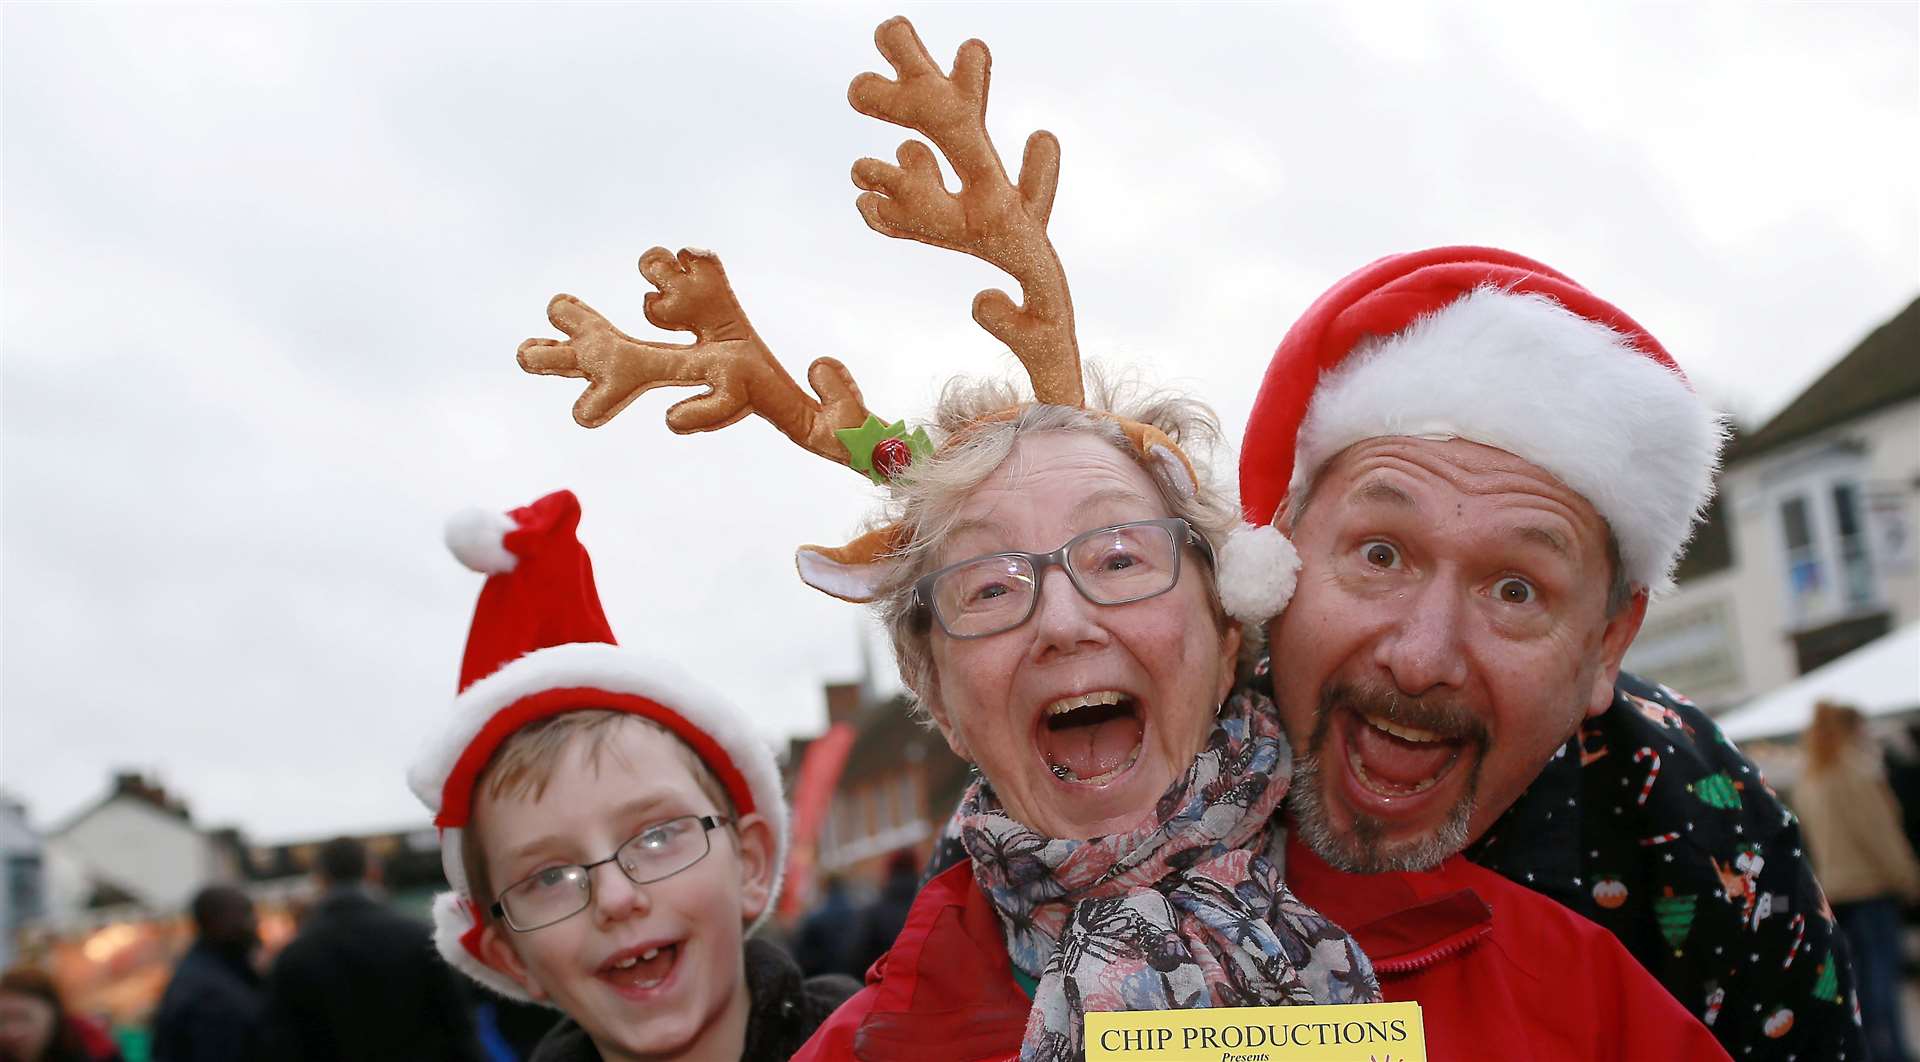 The West Malling Christmas Festival is coming Picture: Phil Lee